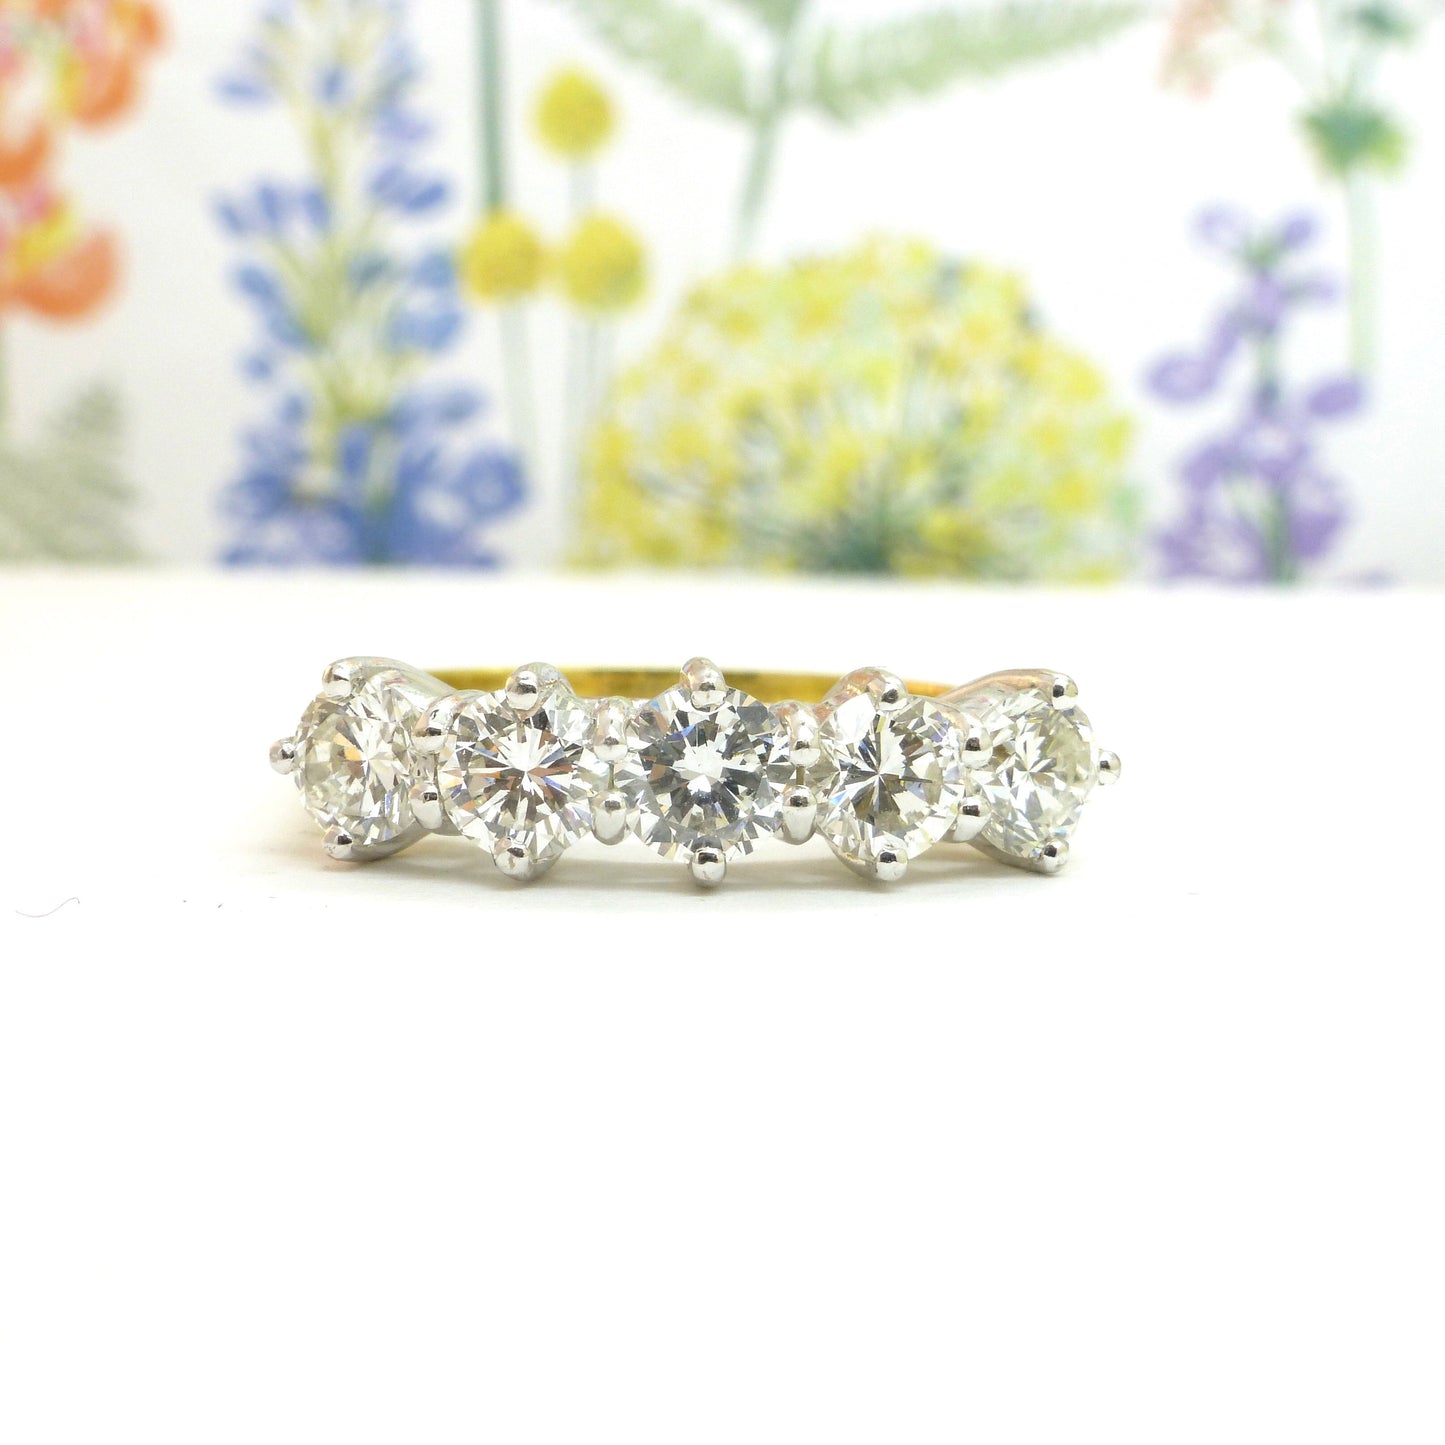 Stunning Vintage 18ct gold five stone diamond ring 1.62 carat ~ with appraisal